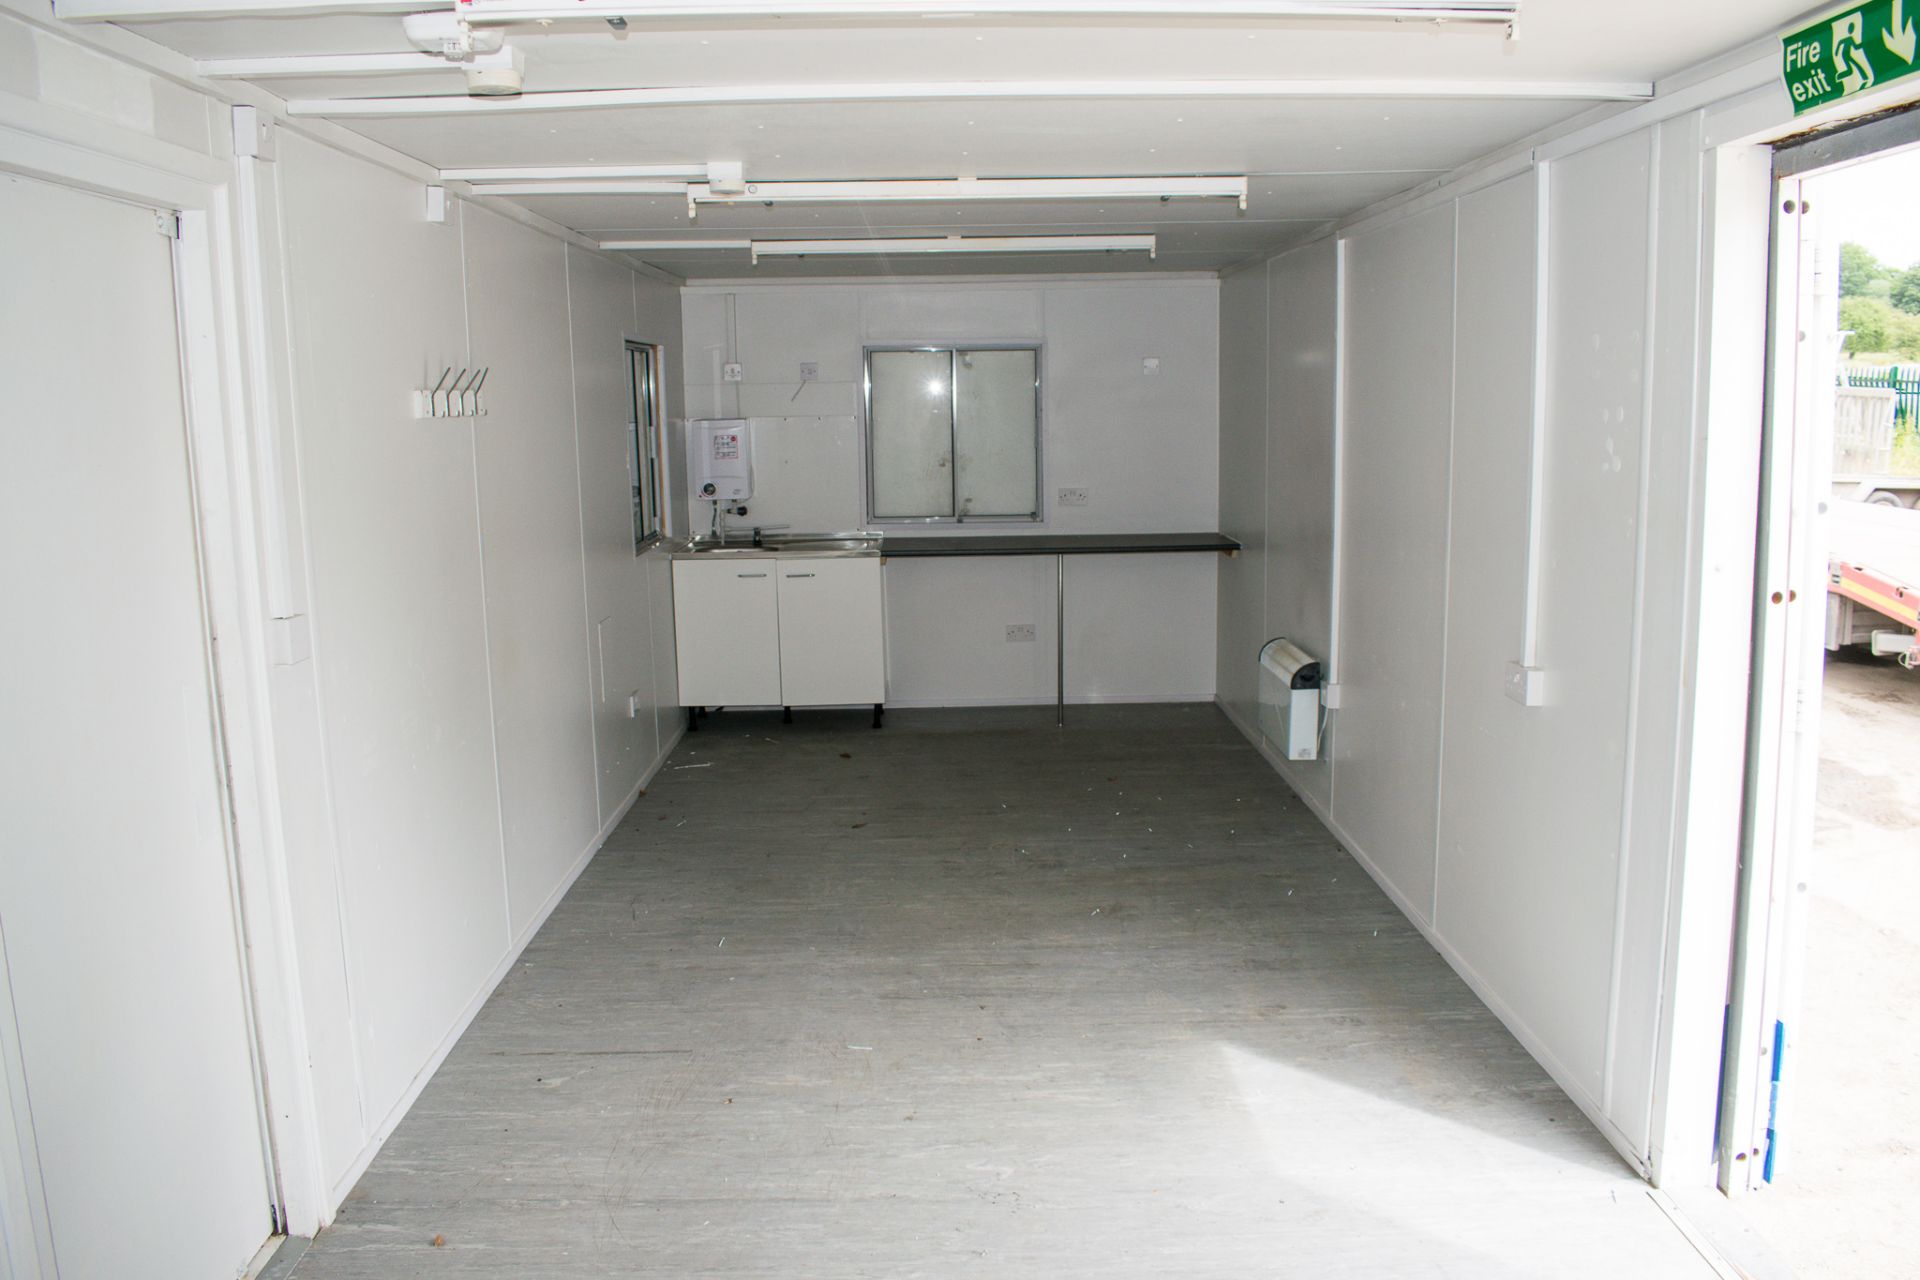 32 foot by 10 foot anti vandal steel open plan office unit  c/w sink unit and worktop at one end and - Image 7 of 8